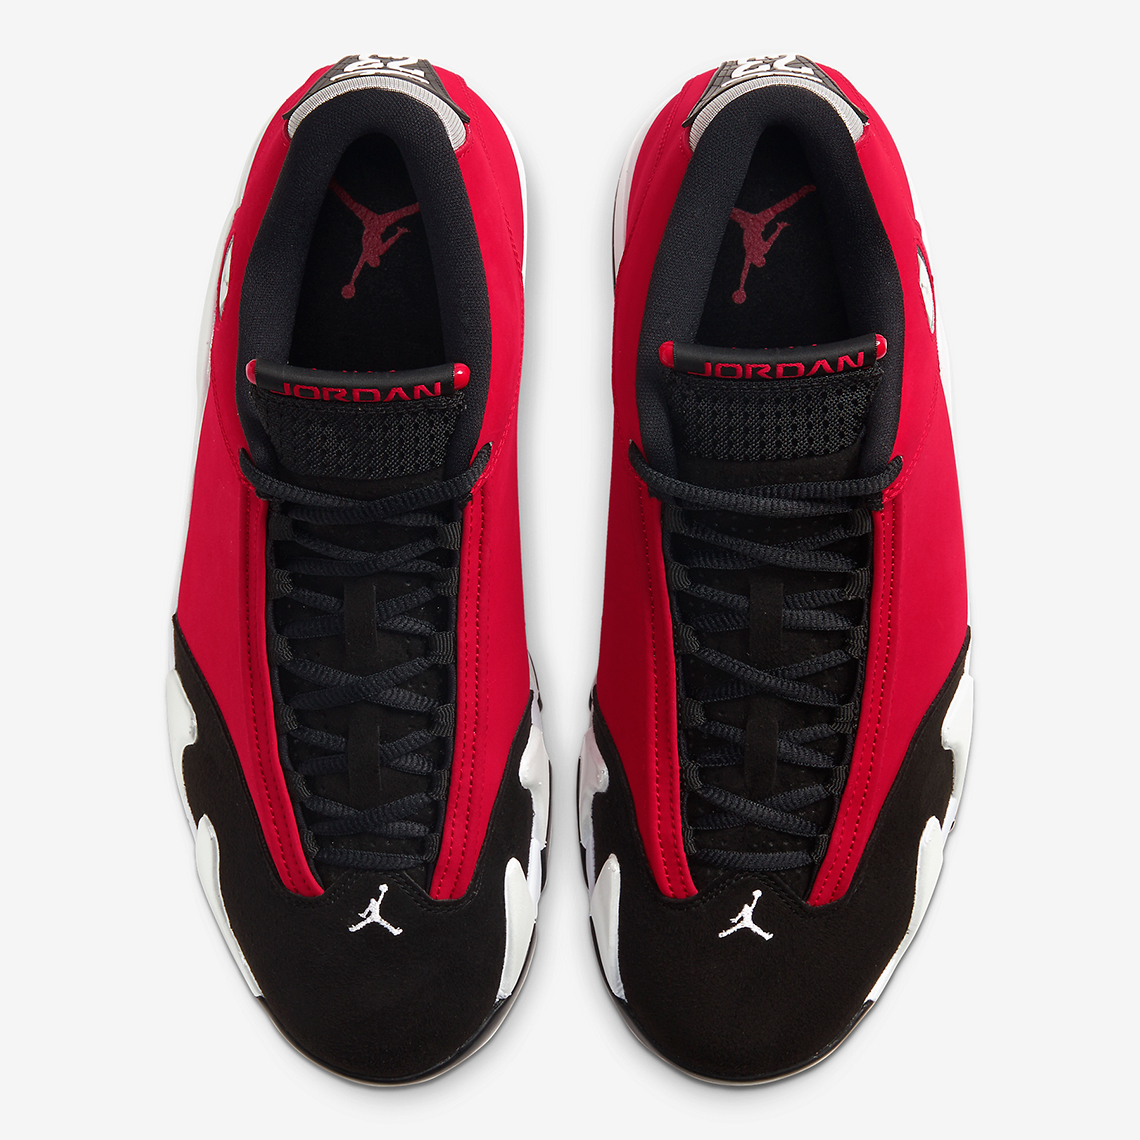 14s red and black